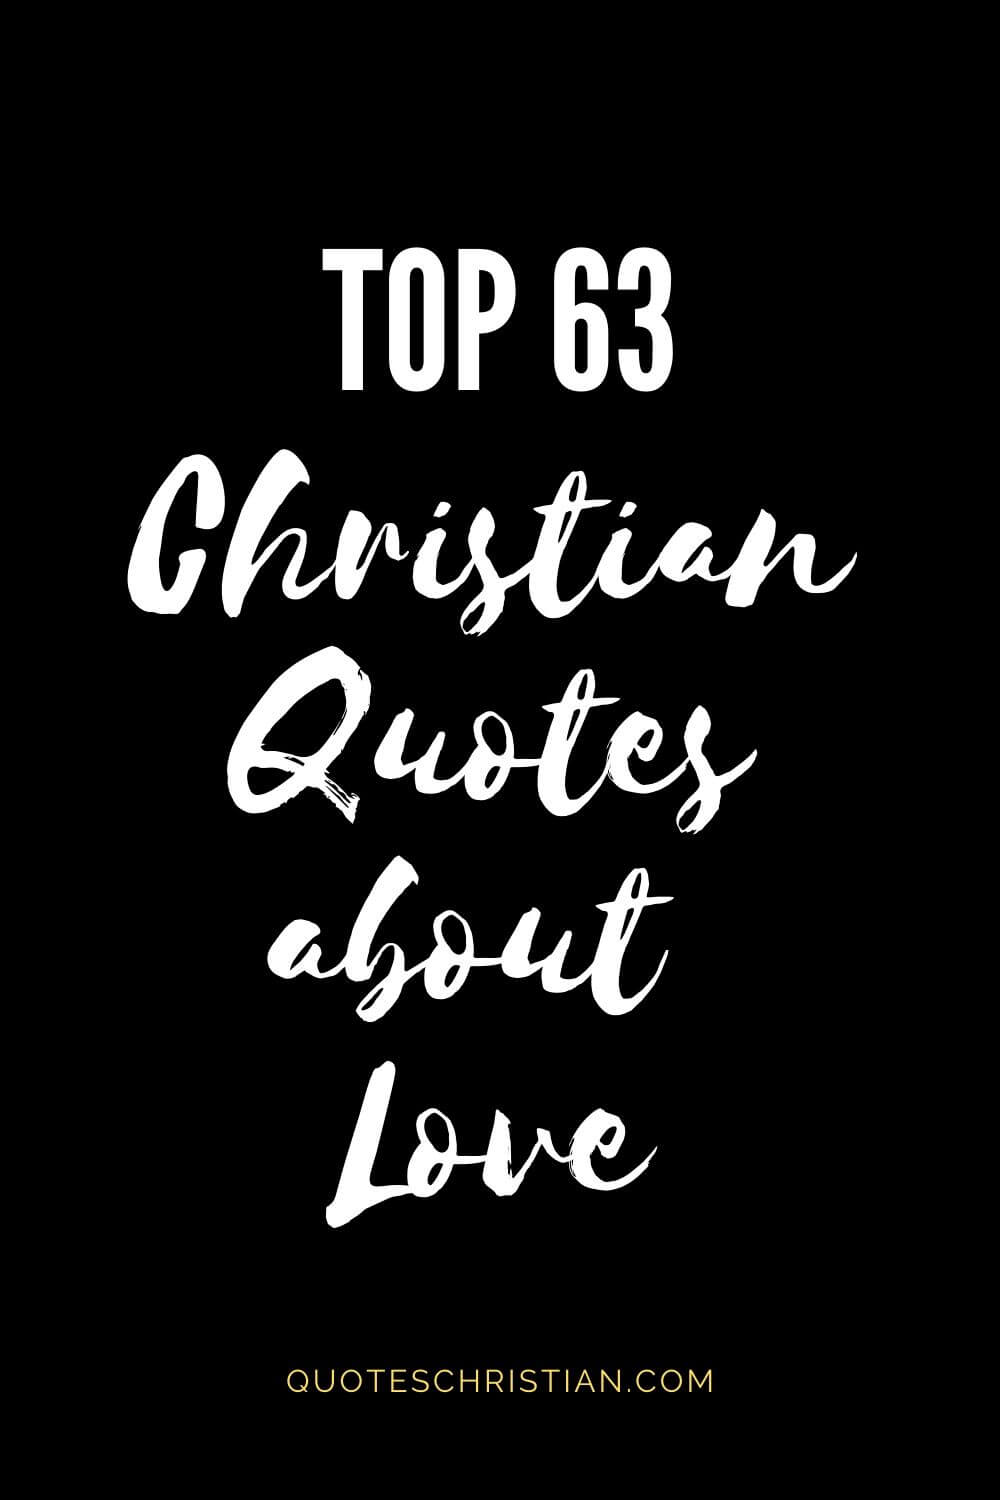 Find more christian quotes about love. These will remind you how much our Lord loves us all. Here find a collection of quotes about love from christians.